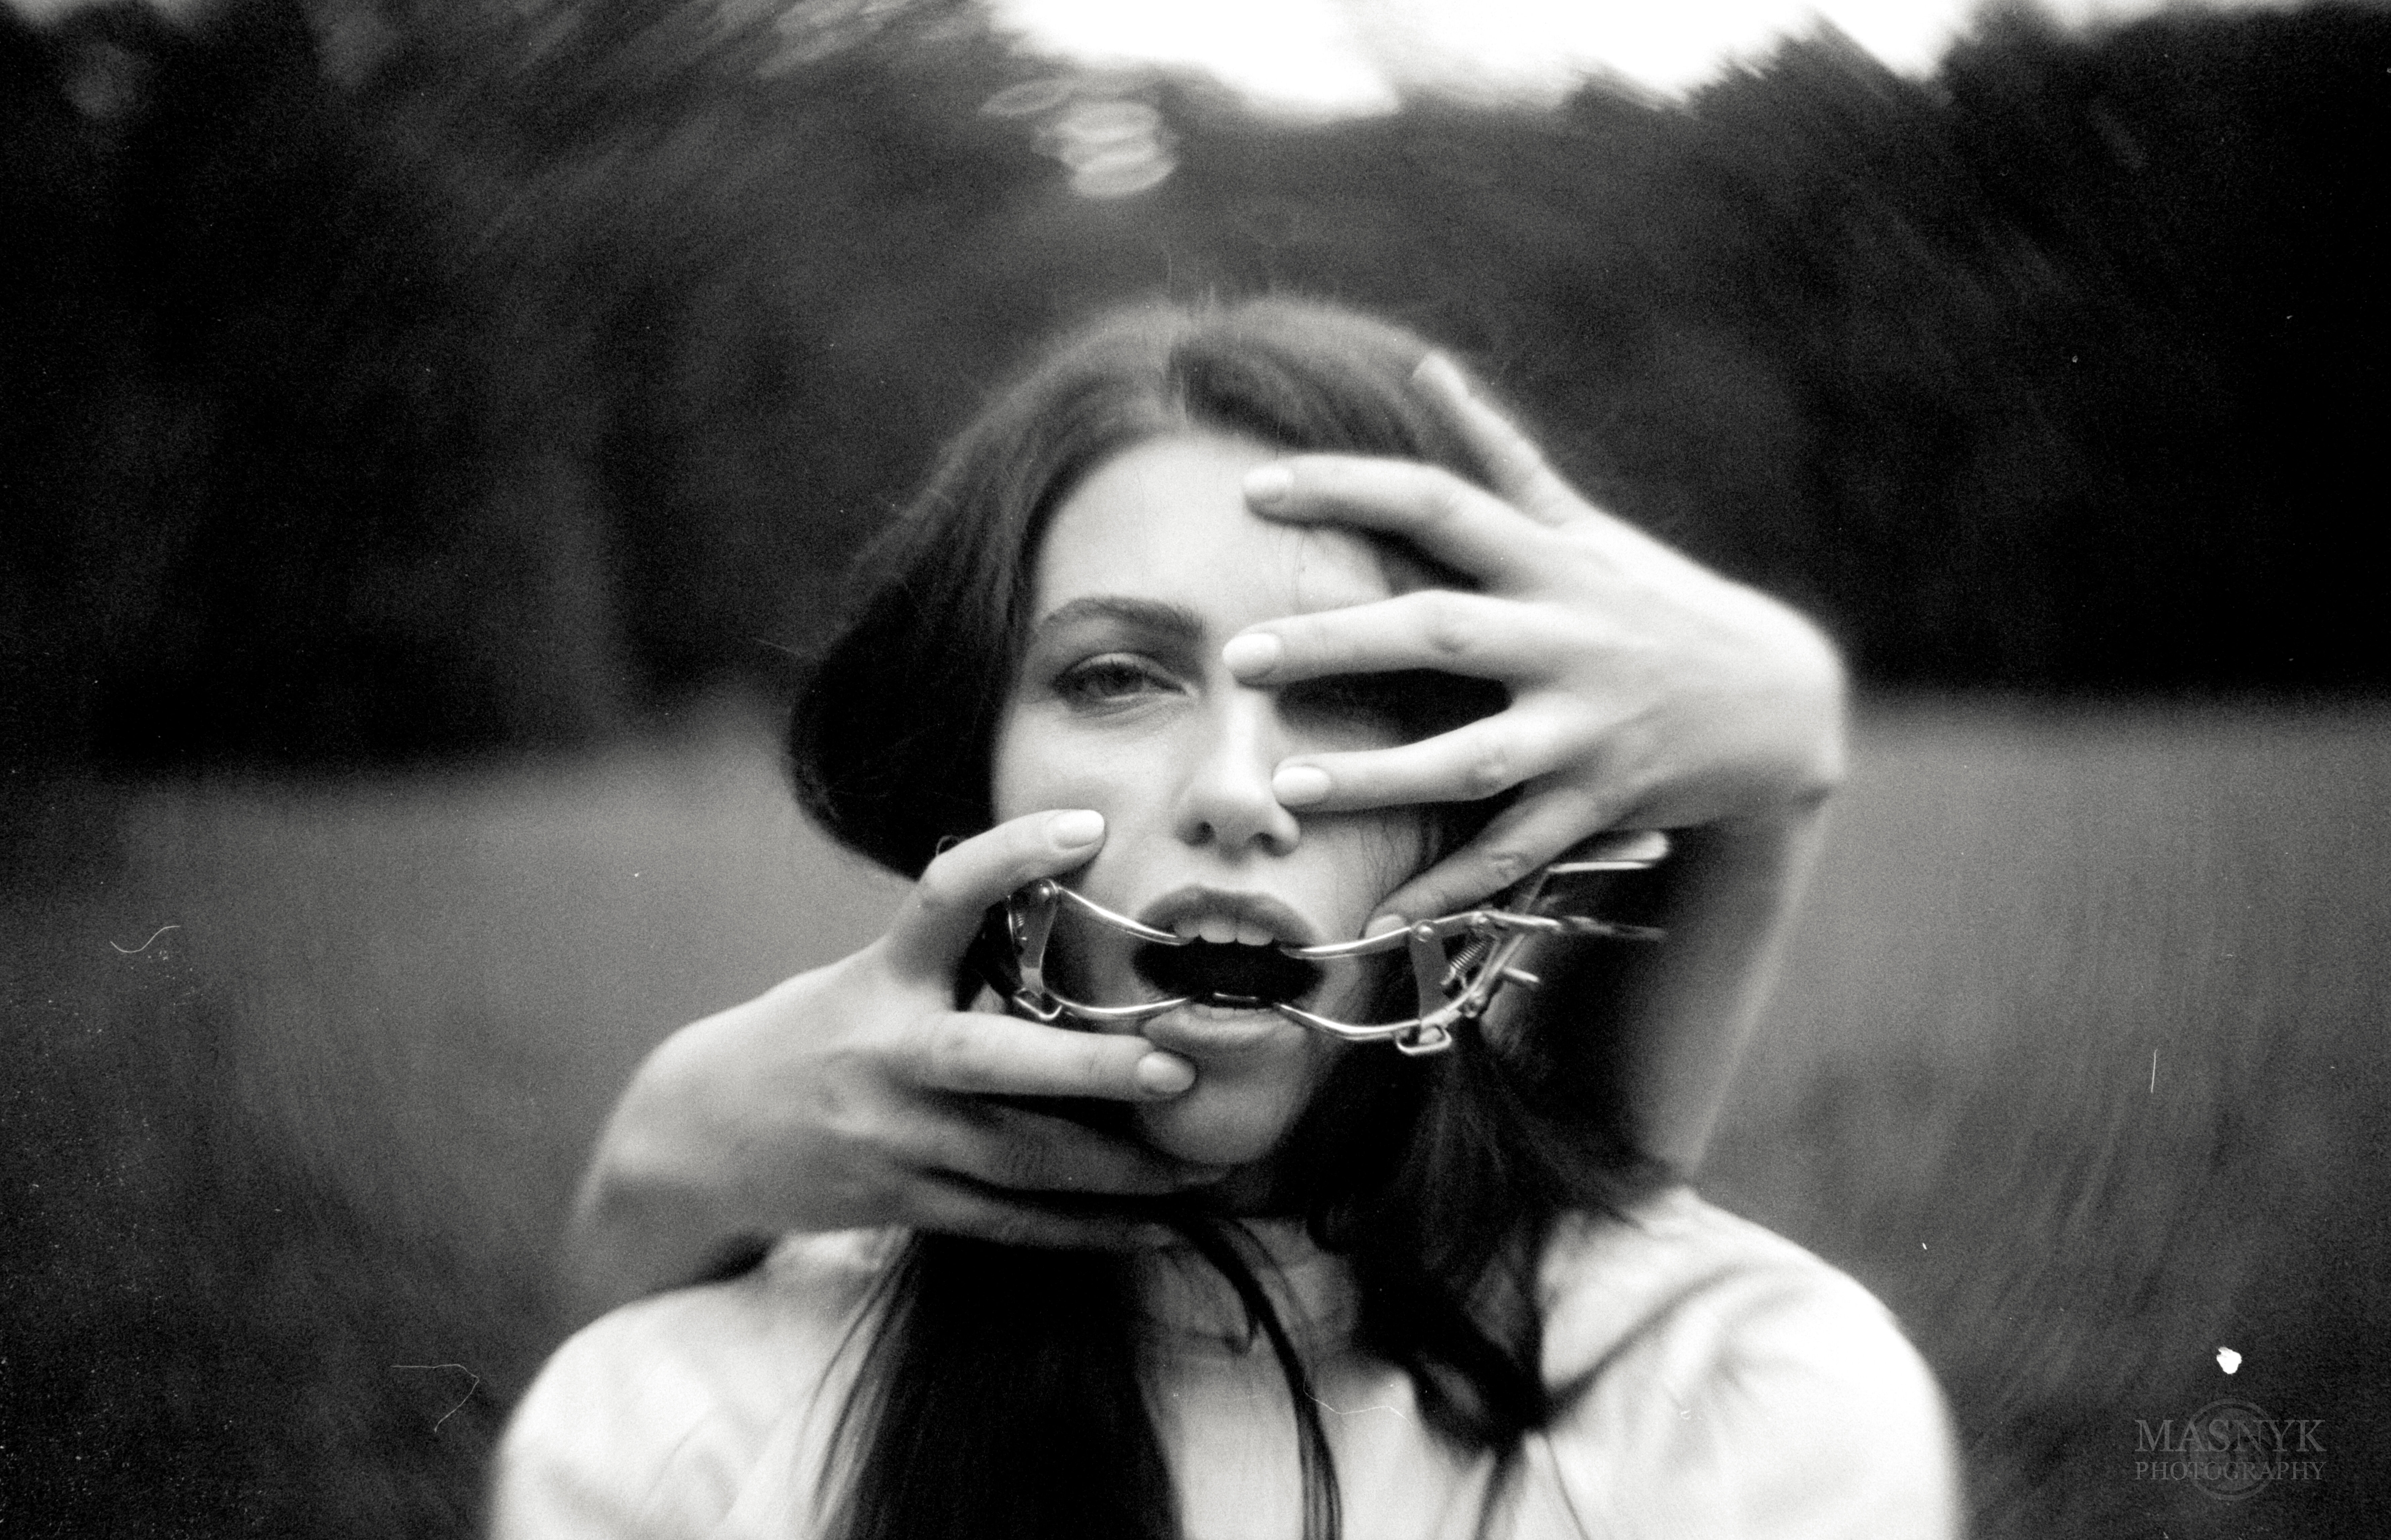 Analog horror photo. Gagged woman held by her face